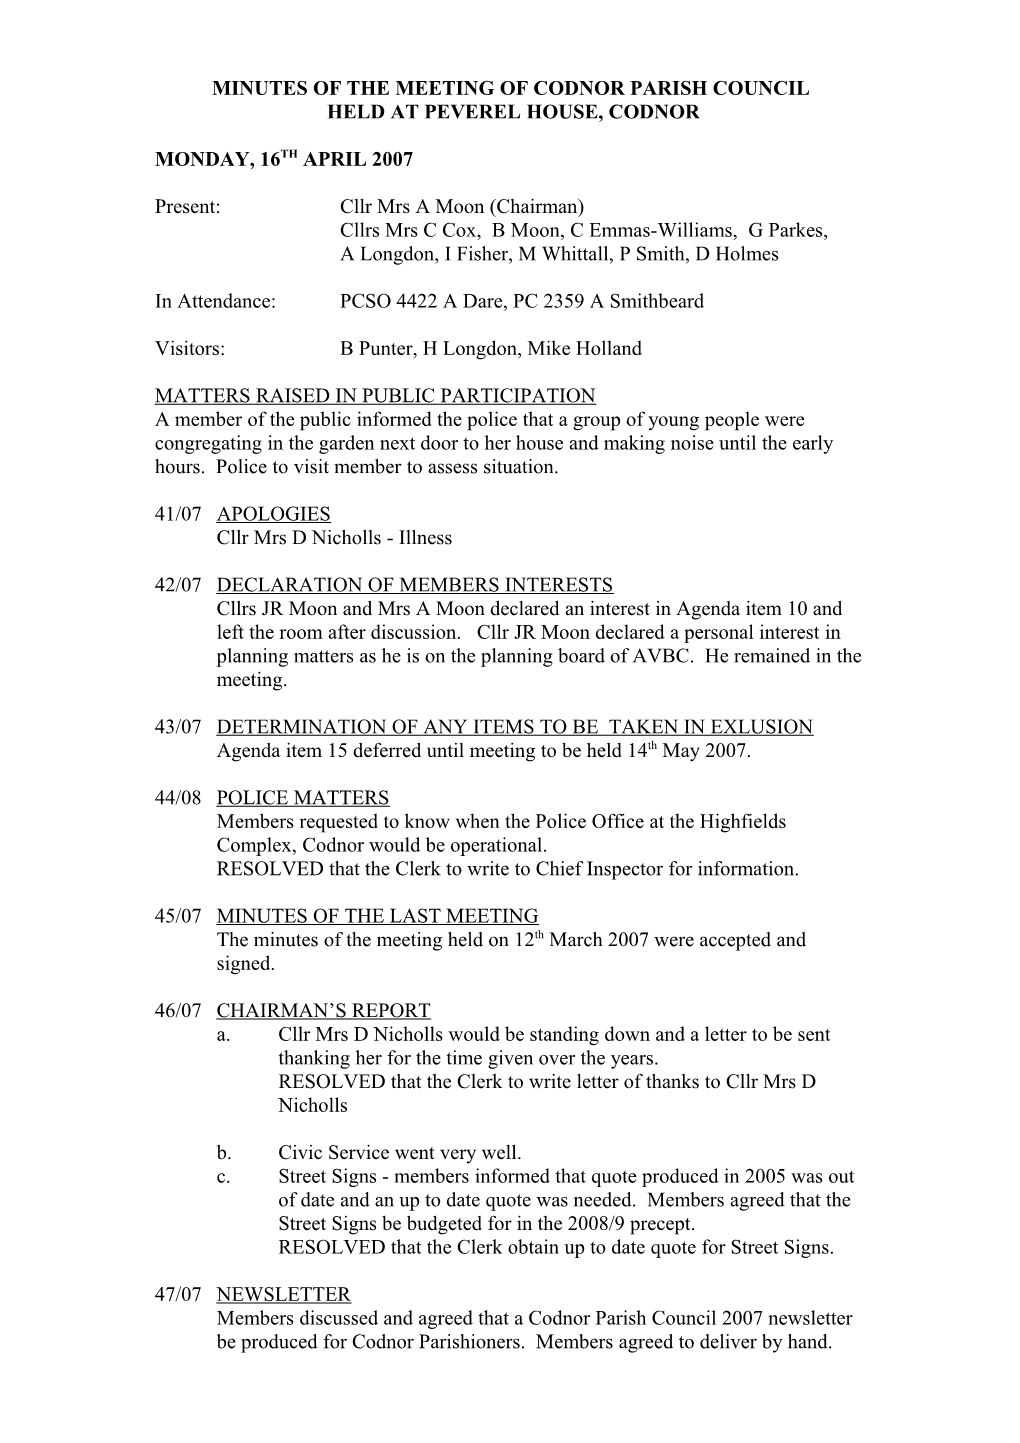 Minutes of the Meeting of Codnor Parish Council